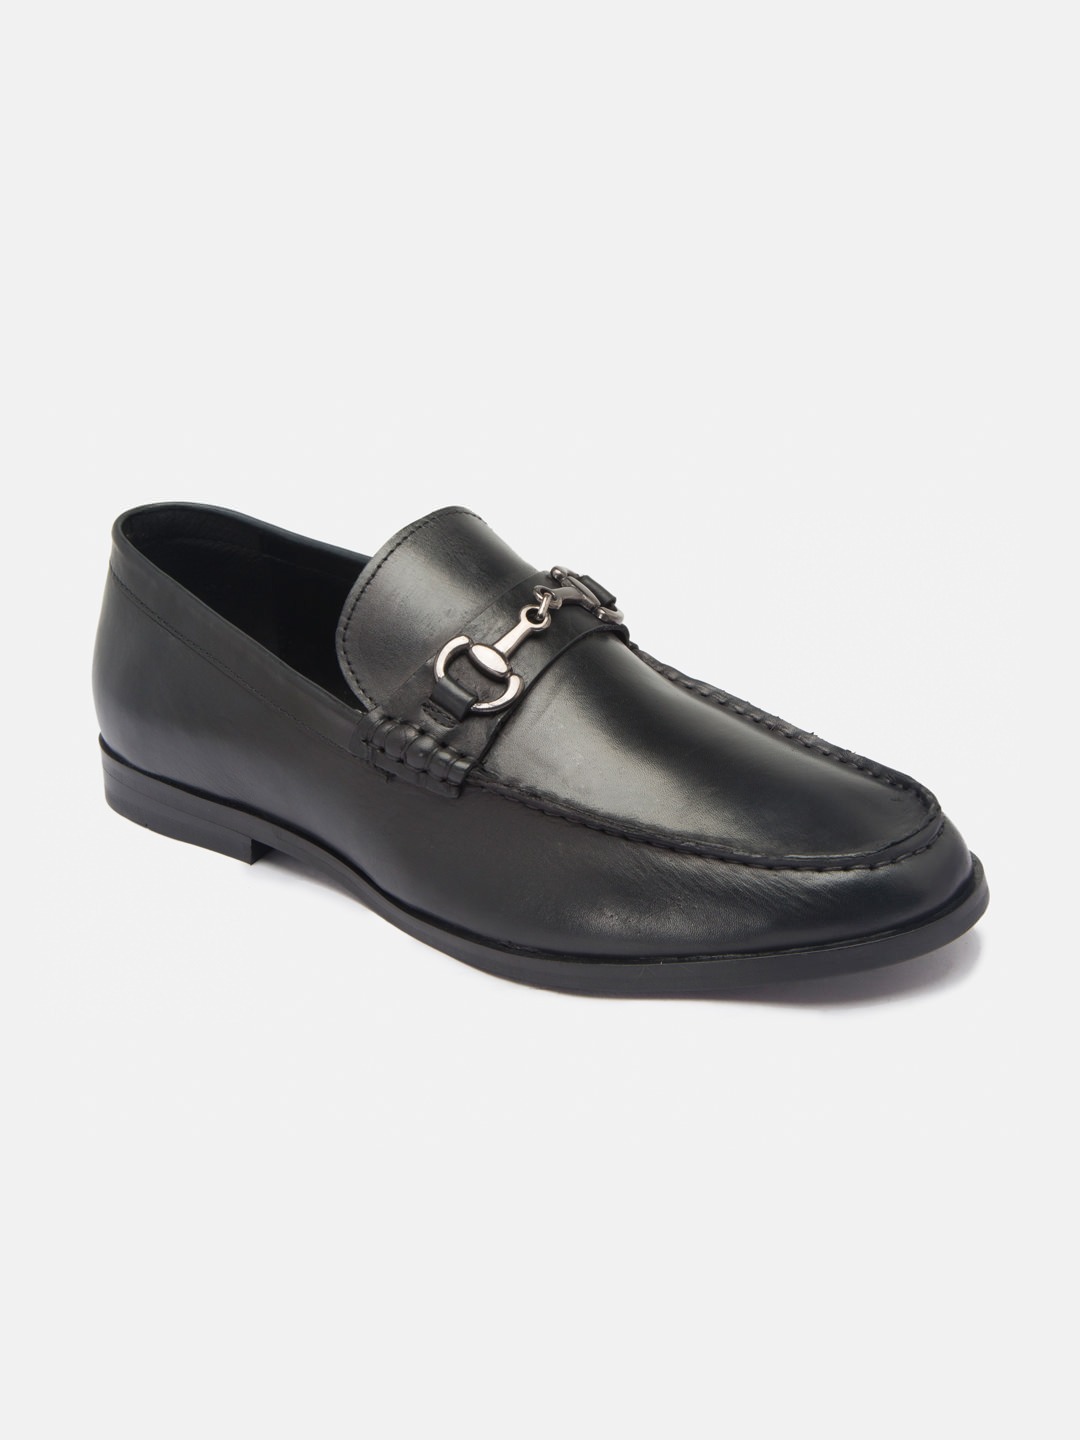 Buy Online Genuine Leather Black Loafers Shoes for Men